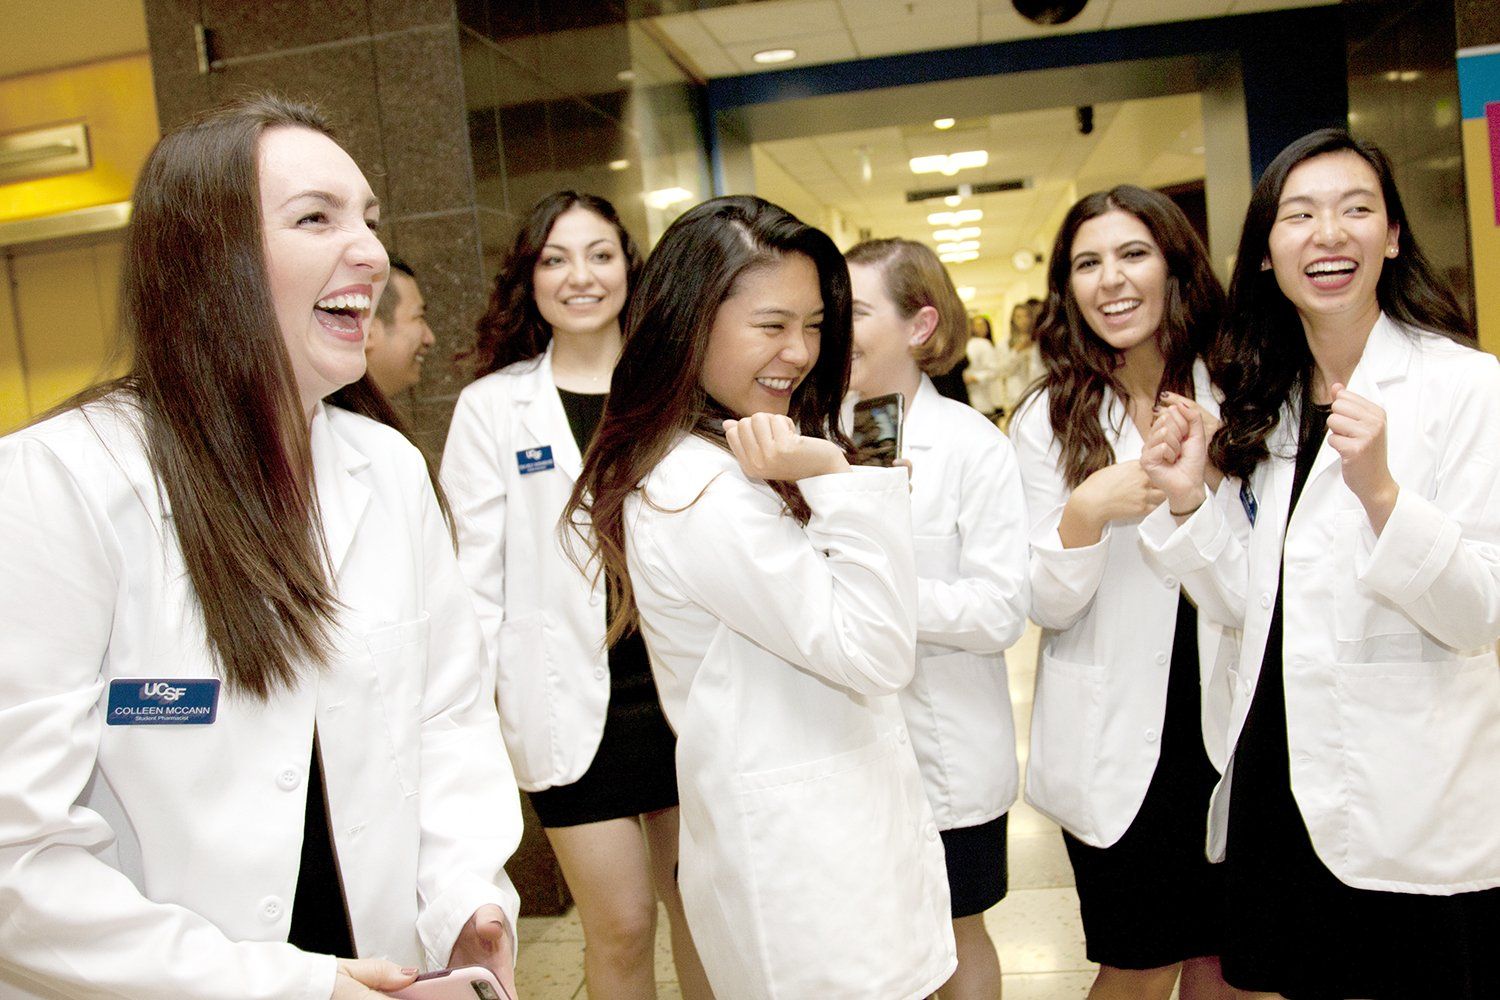 A group of new School of Pharmacy students laugh in their white coats